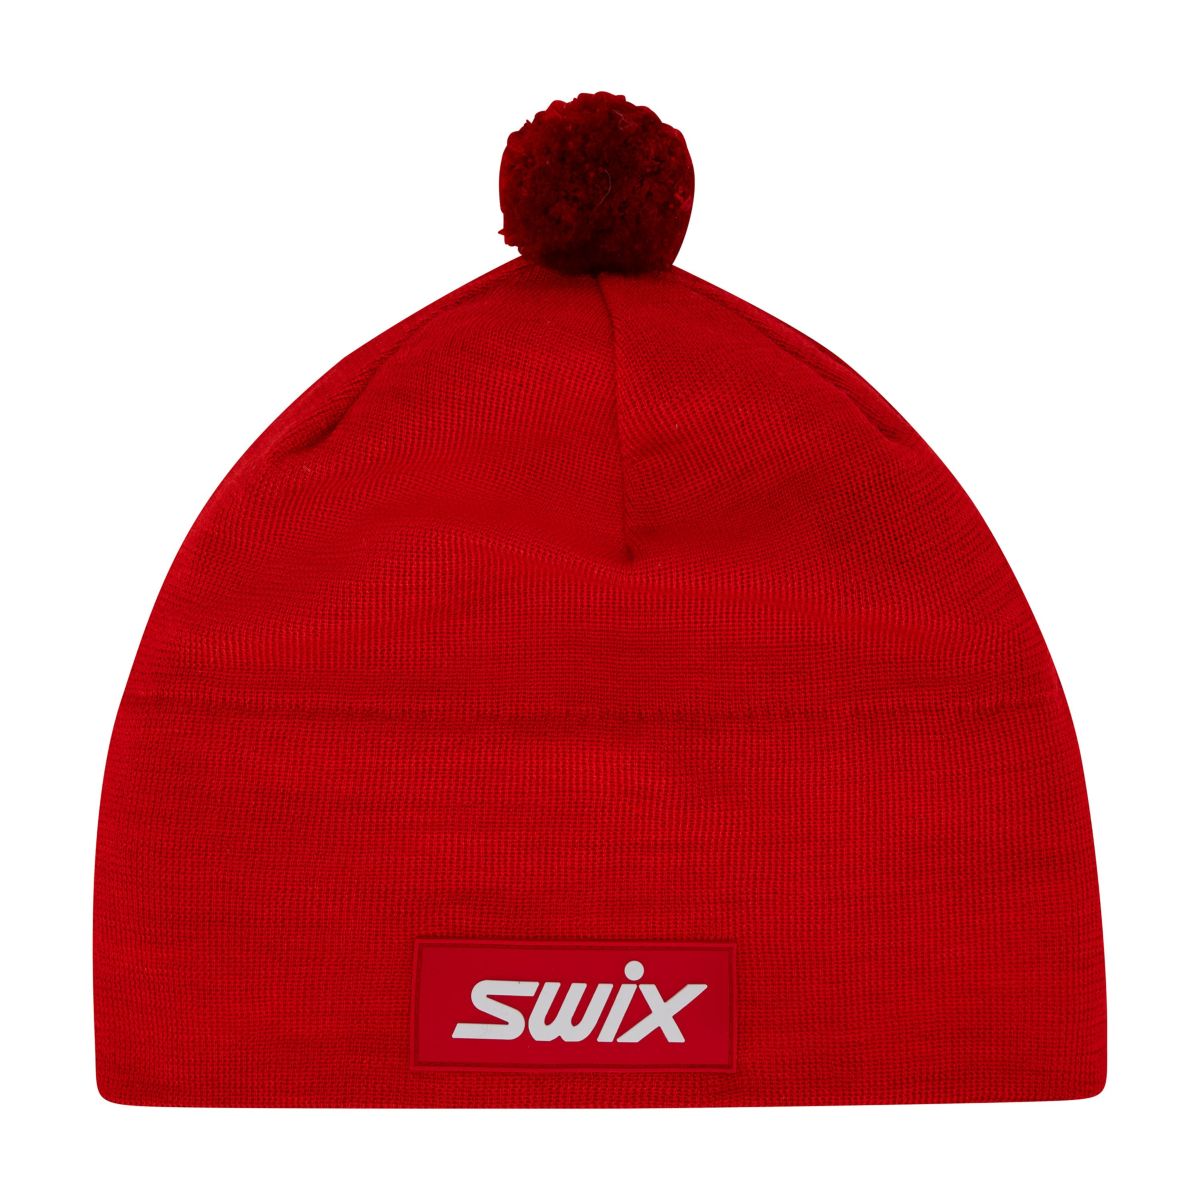 TRADITION - TUQUE